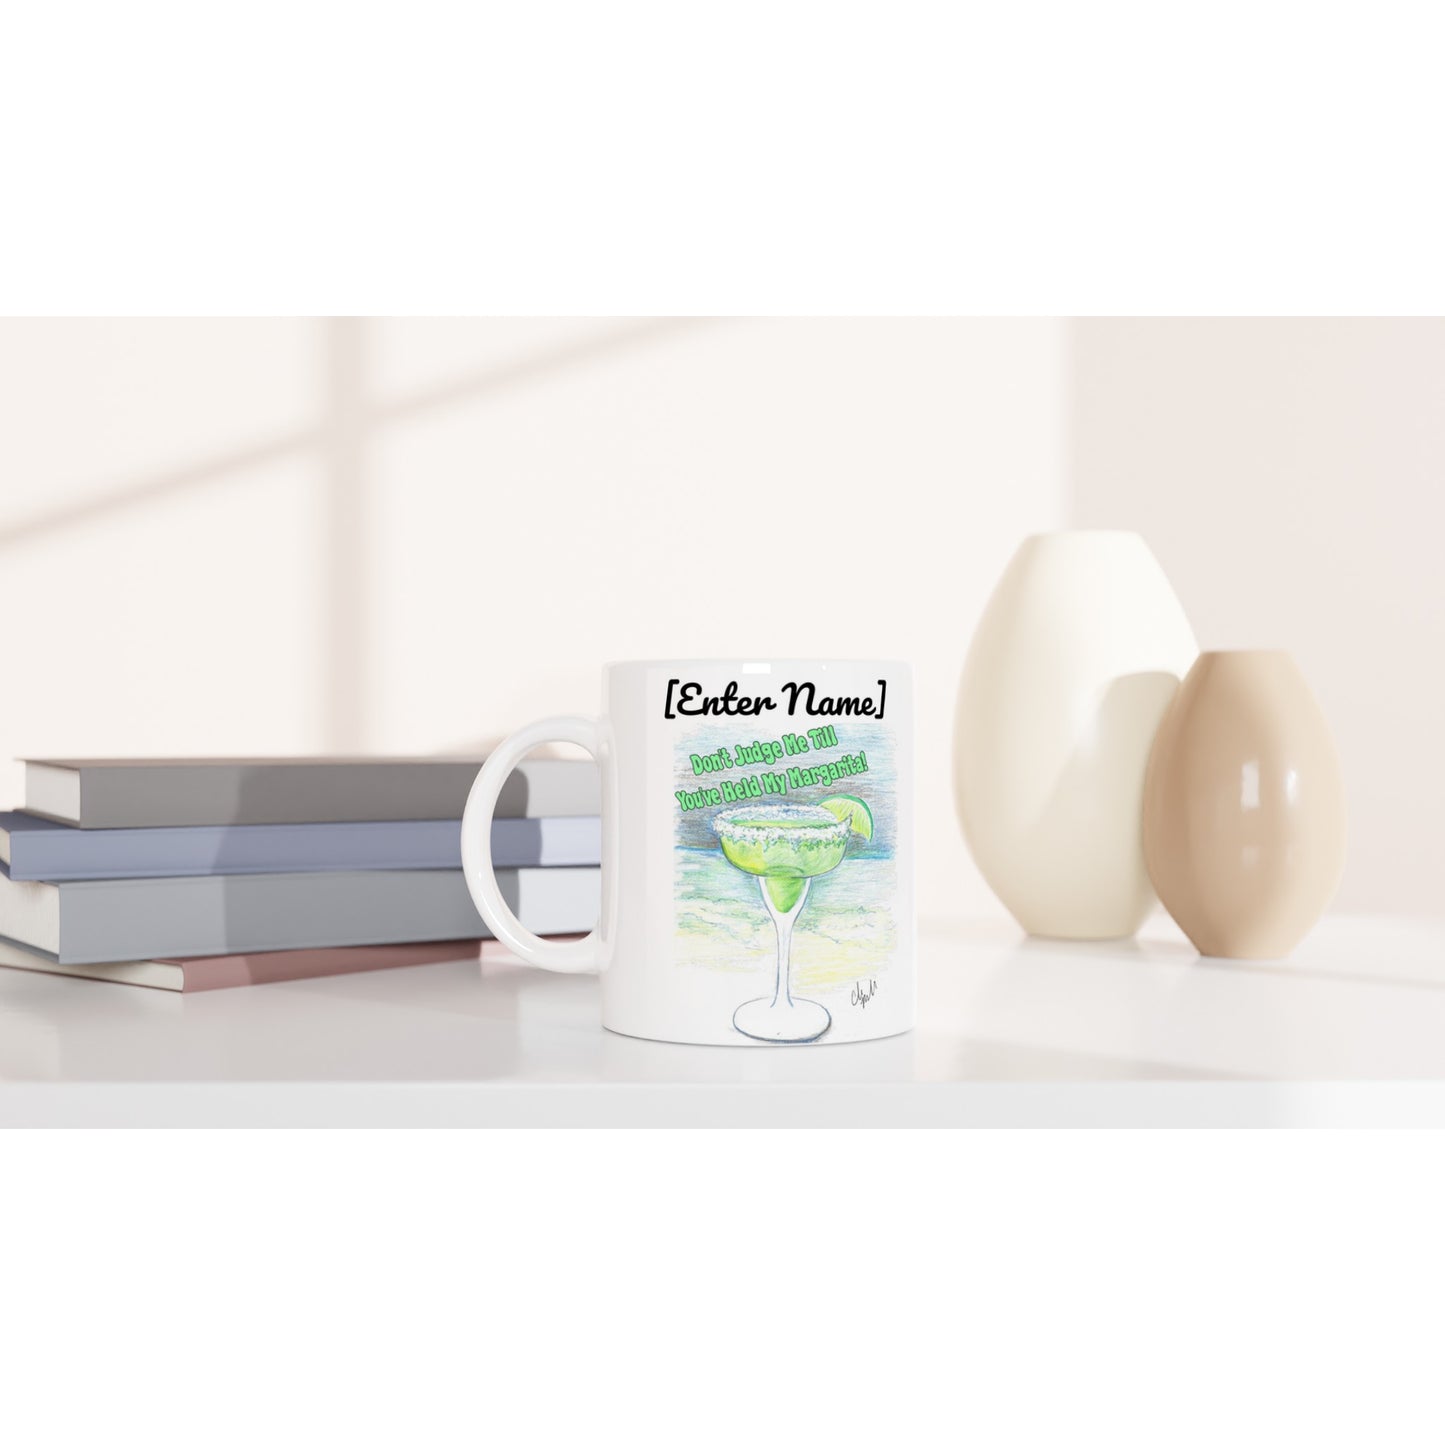 Personalized white ceramic 11oz mug with motto Don't Judge Me till You've Held my Margarita dishwasher and microwave safe from WhatYa Say Apparel sitting on coffee table with books and two vases.